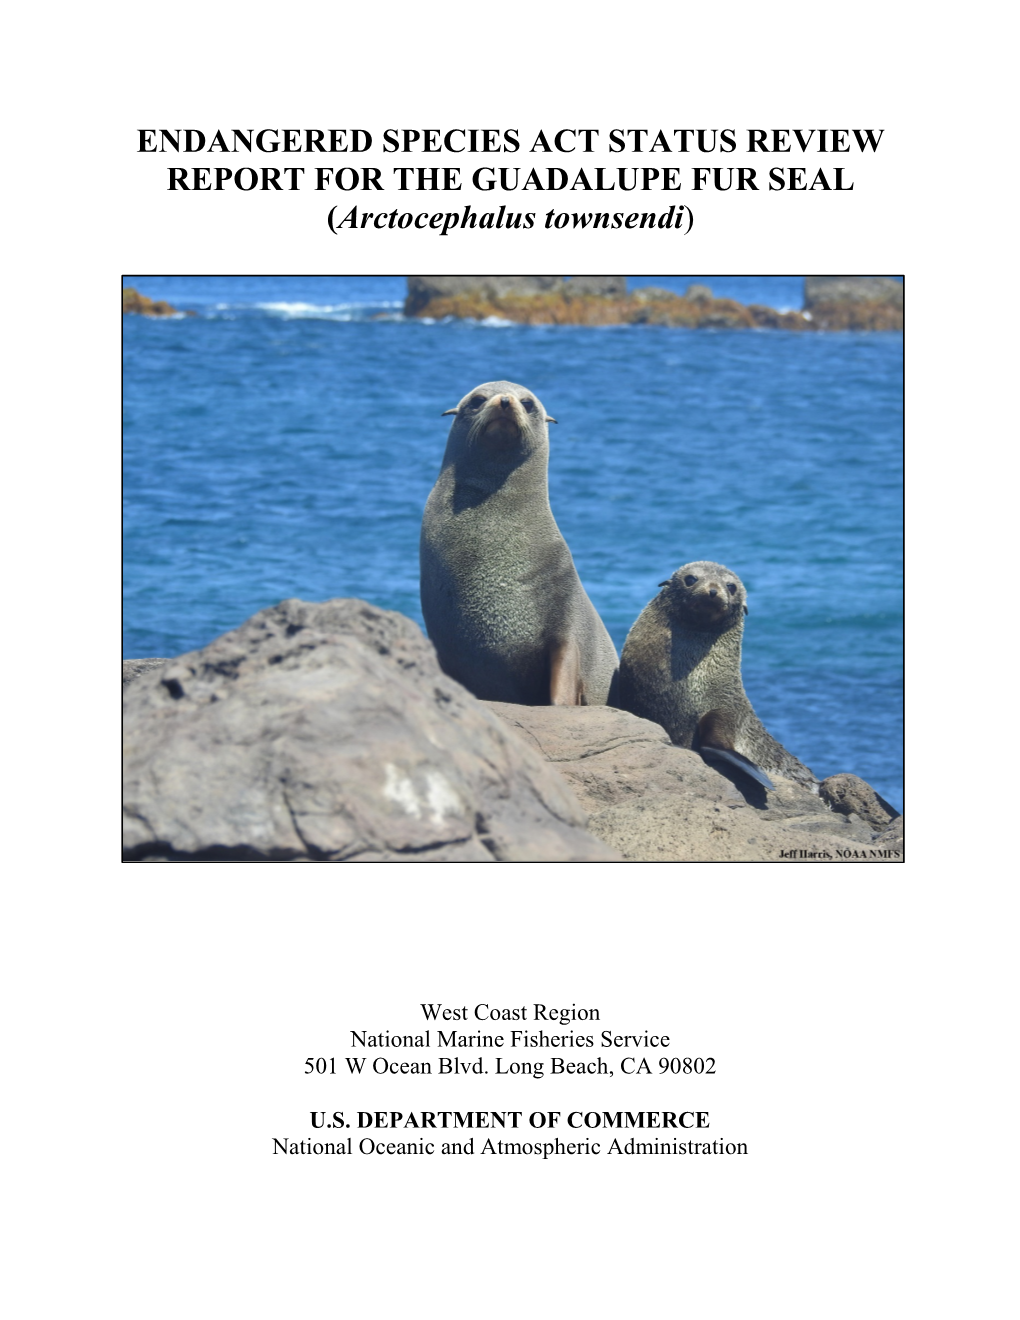 ENDANGERED SPECIES ACT STATUS REVIEW REPORT for the GUADALUPE FUR SEAL (Arctocephalus Townsendi)